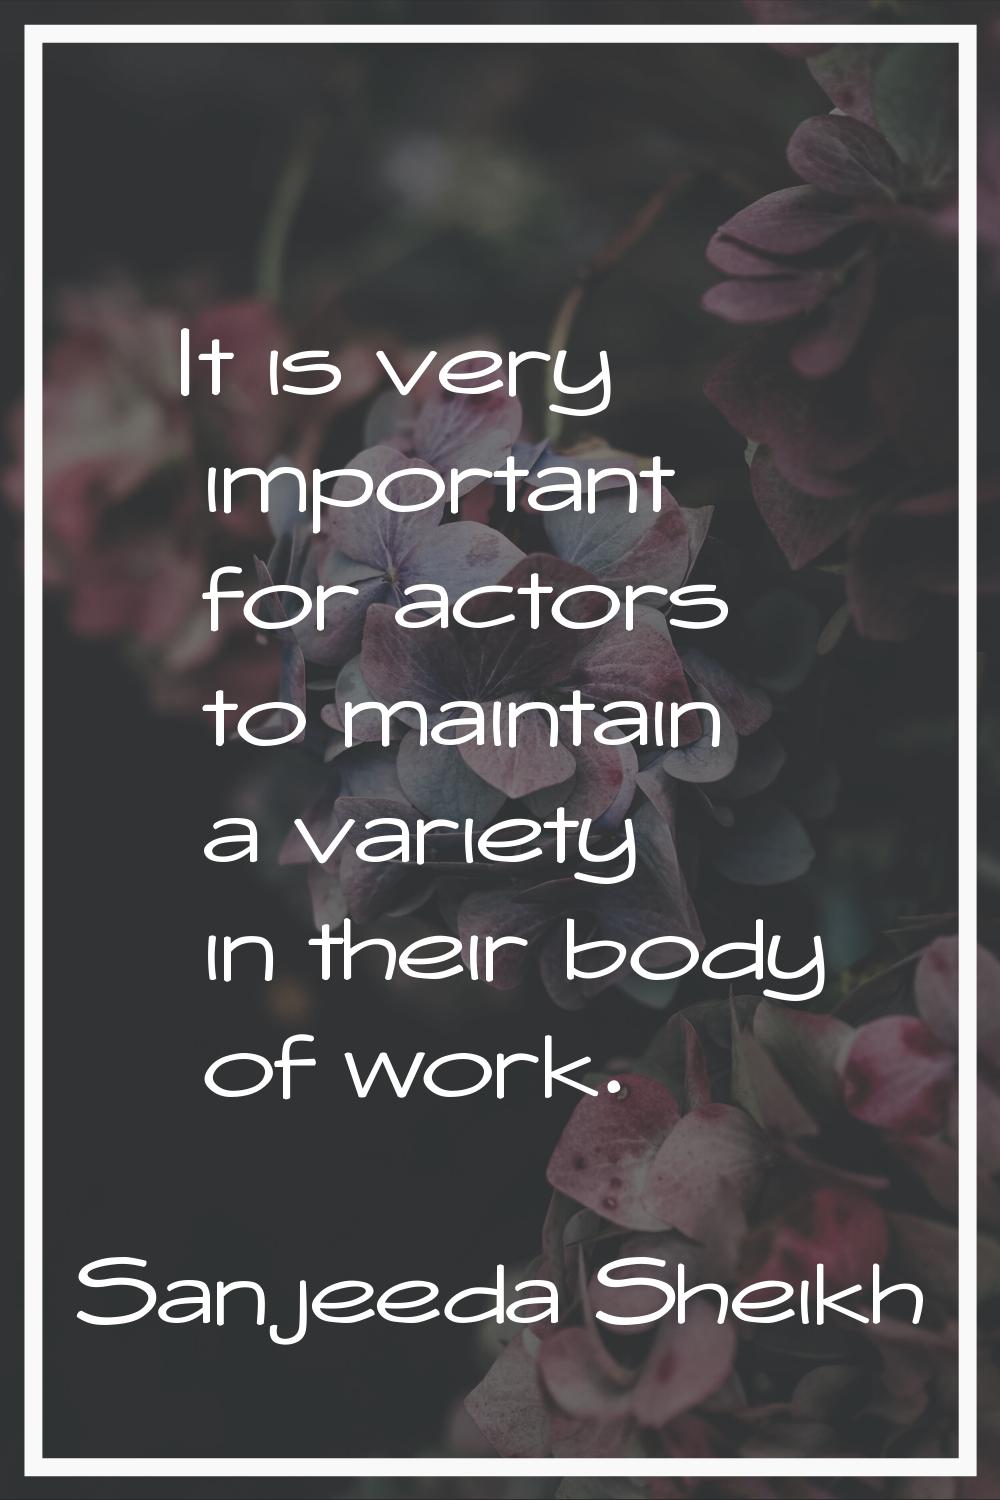 It is very important for actors to maintain a variety in their body of work.